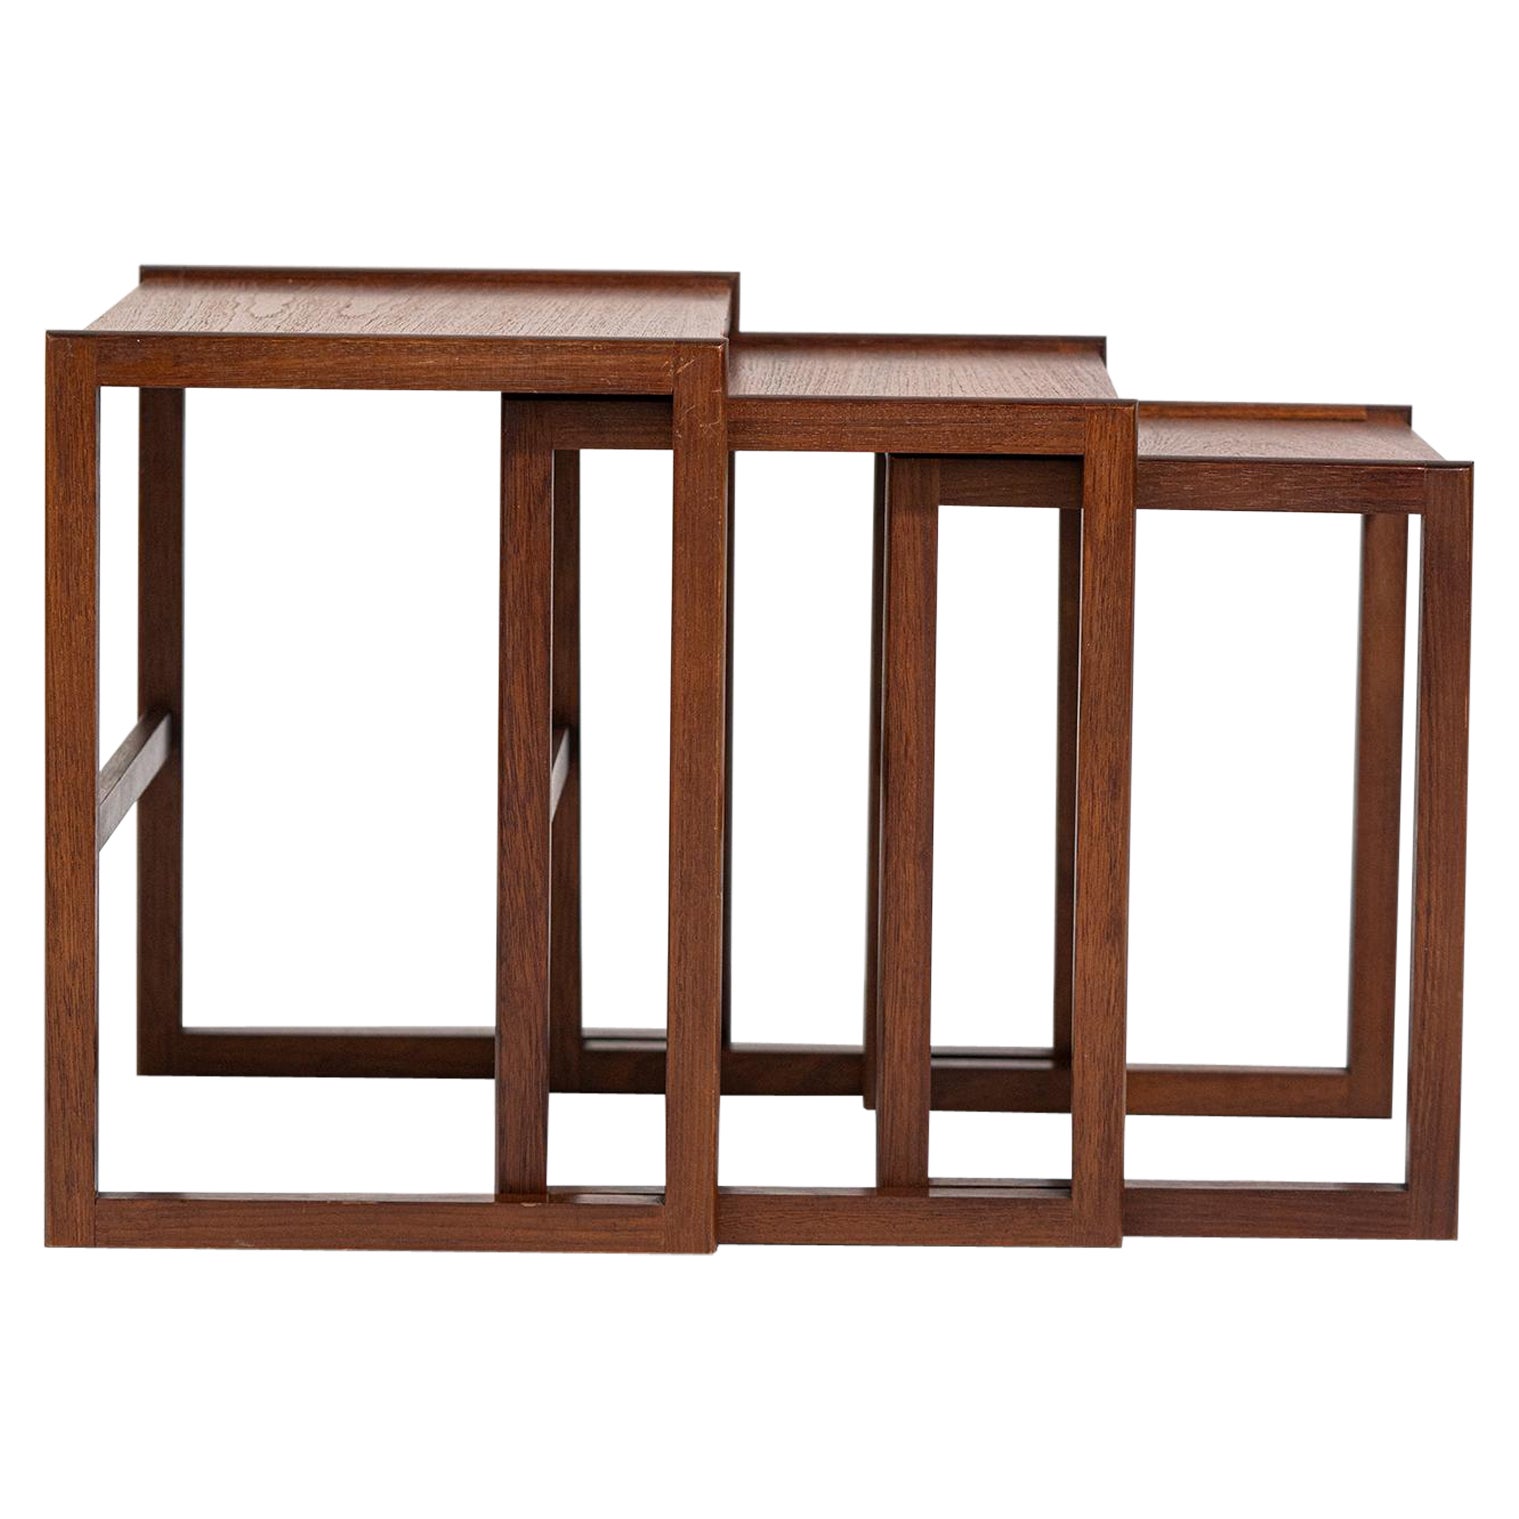 Teak and Mahogany Dream; Nest of Three Tables from 1960s, Sweden For Sale